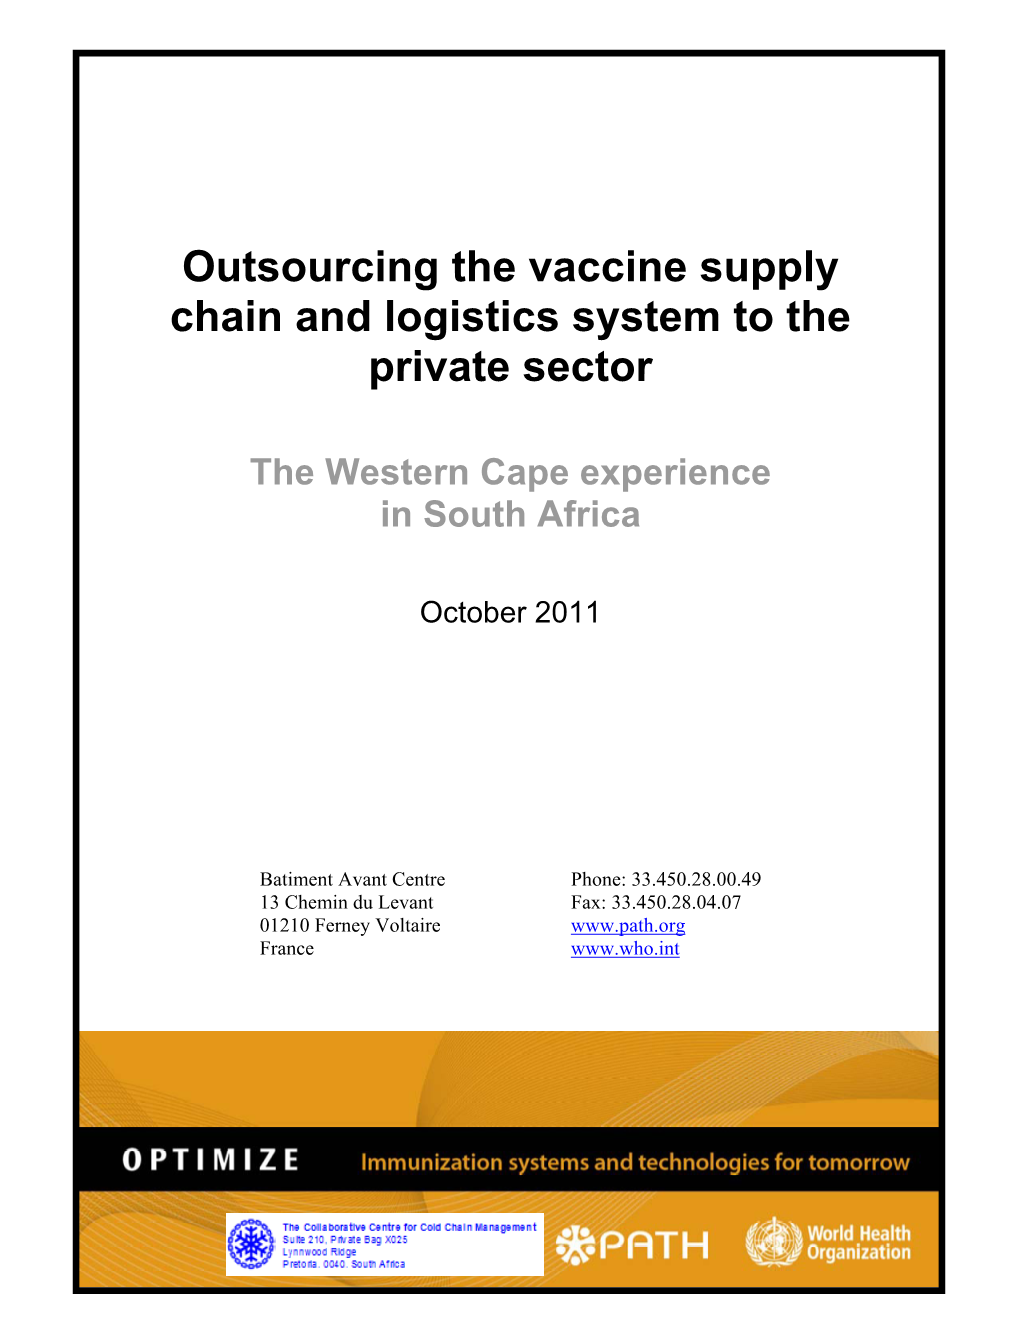 Outsourcing the Vaccine Supply Chain and Logistics System to the Private Sector